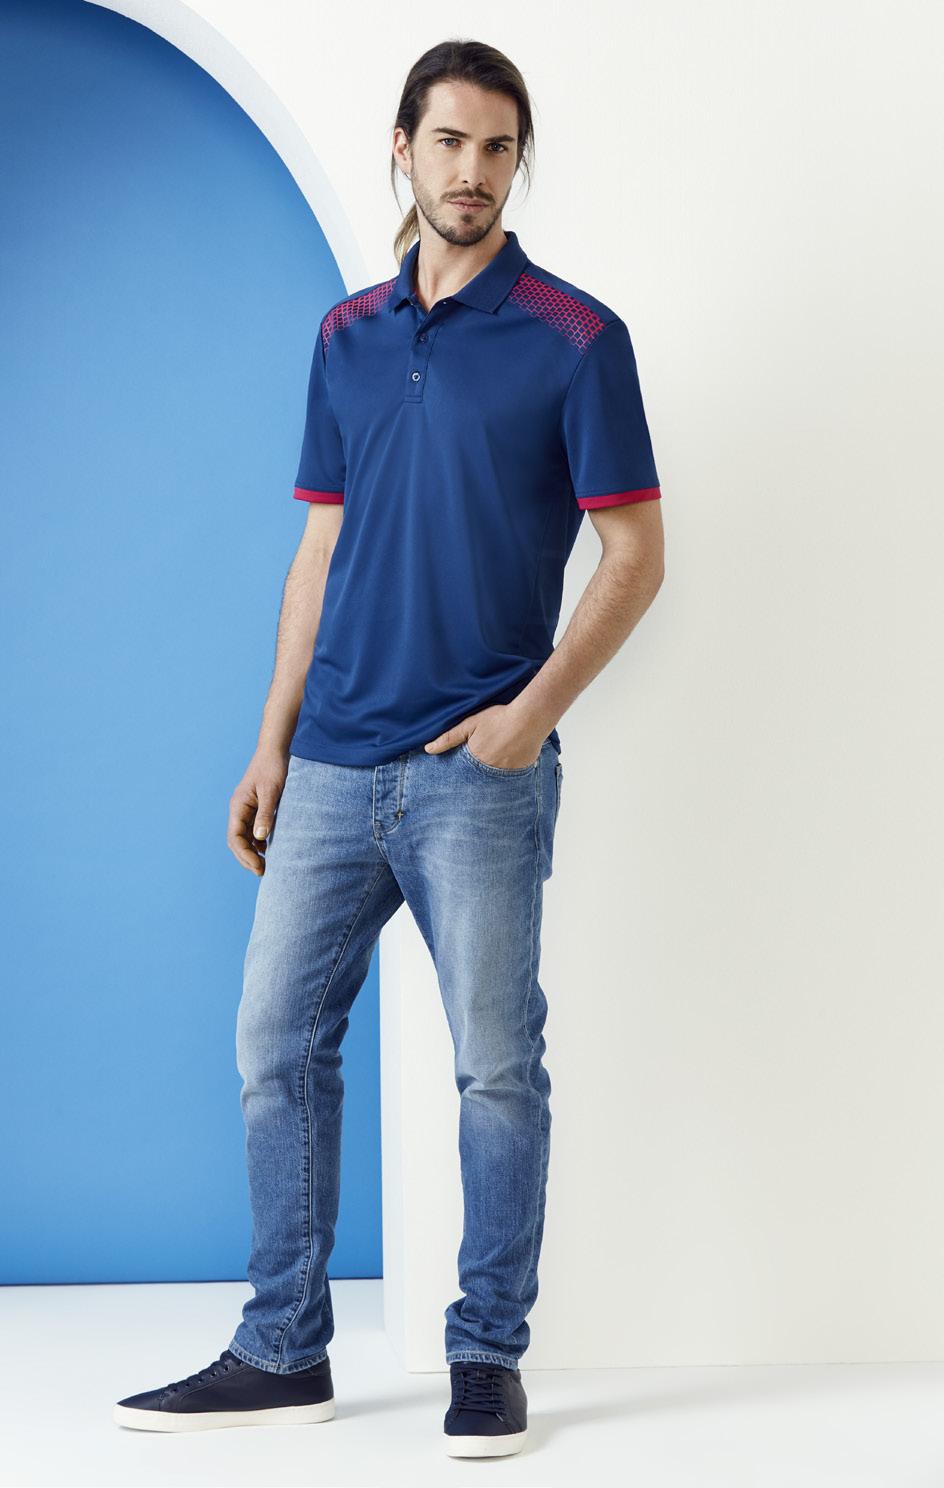 URBAN SPORT_ How we wear it A smart polo with casual jeans creates a